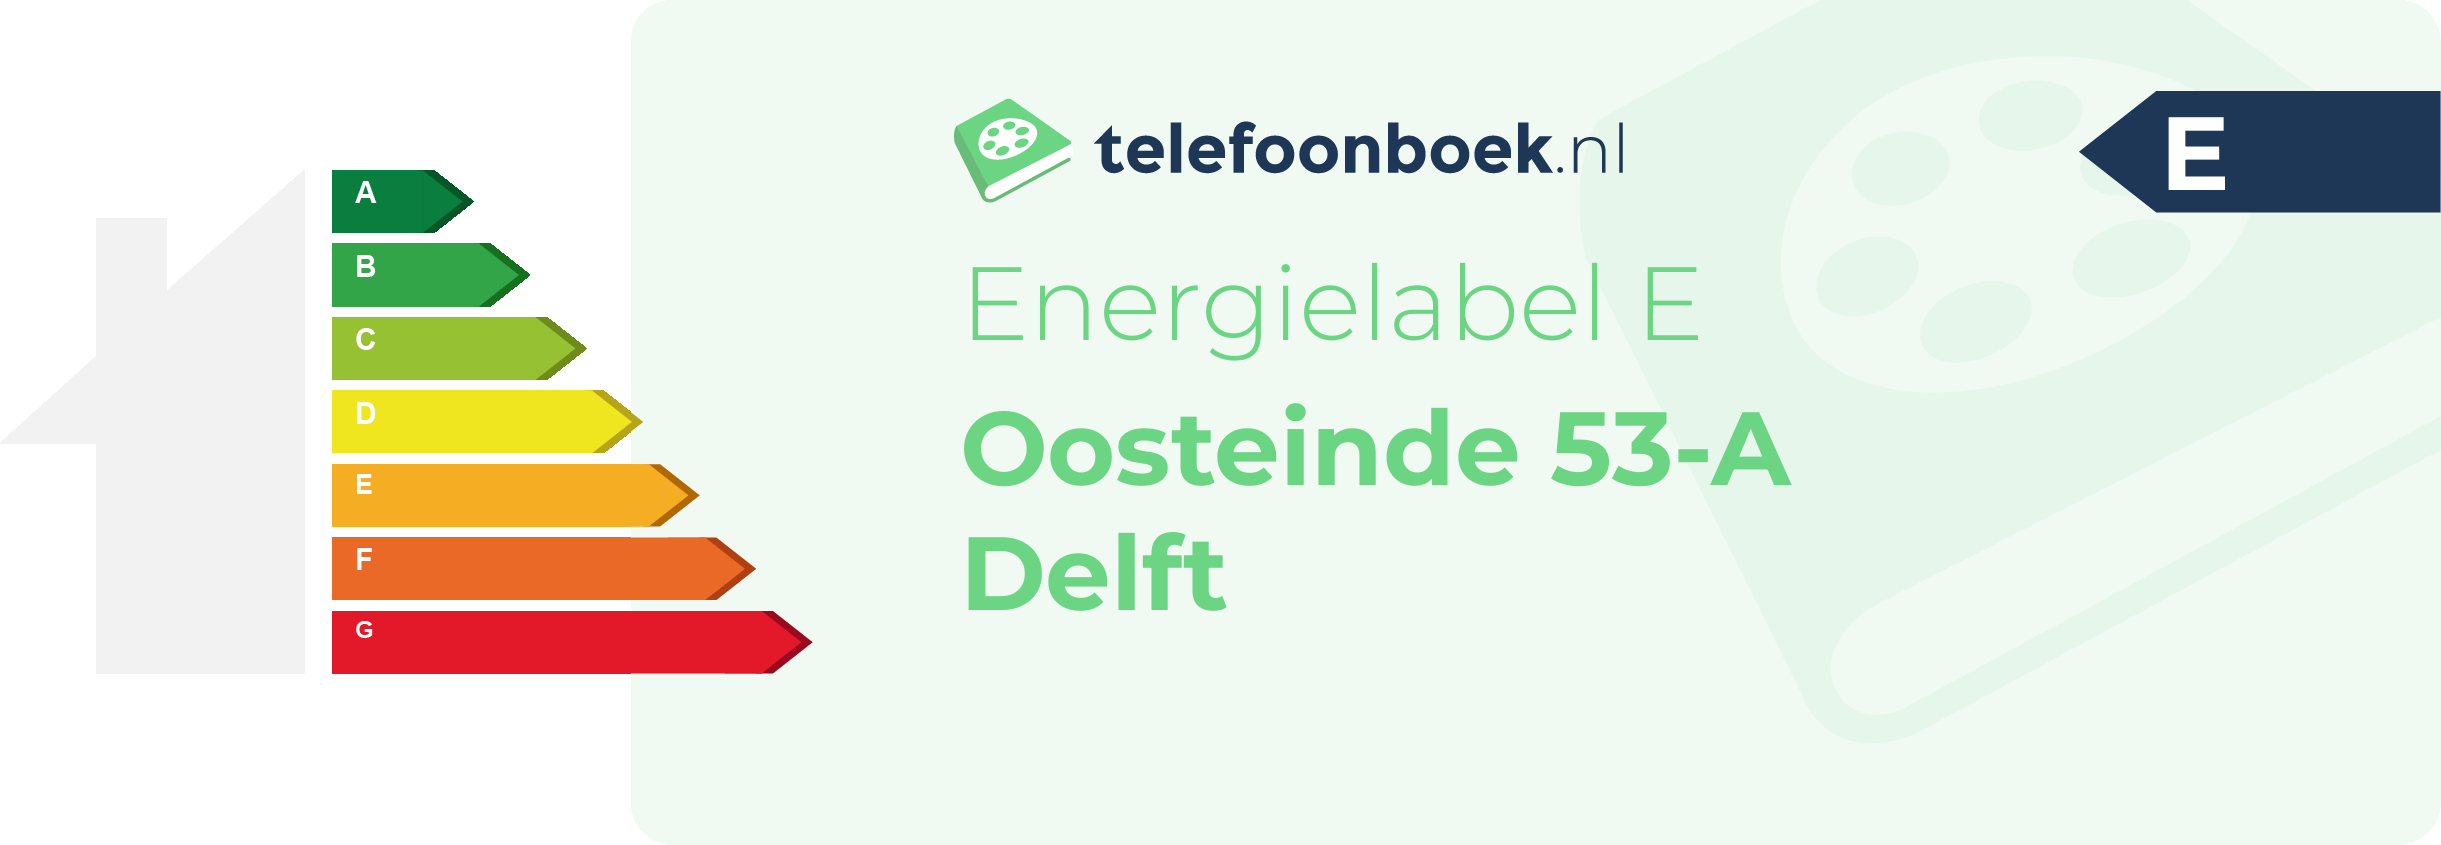 Energielabel Oosteinde 53-A Delft